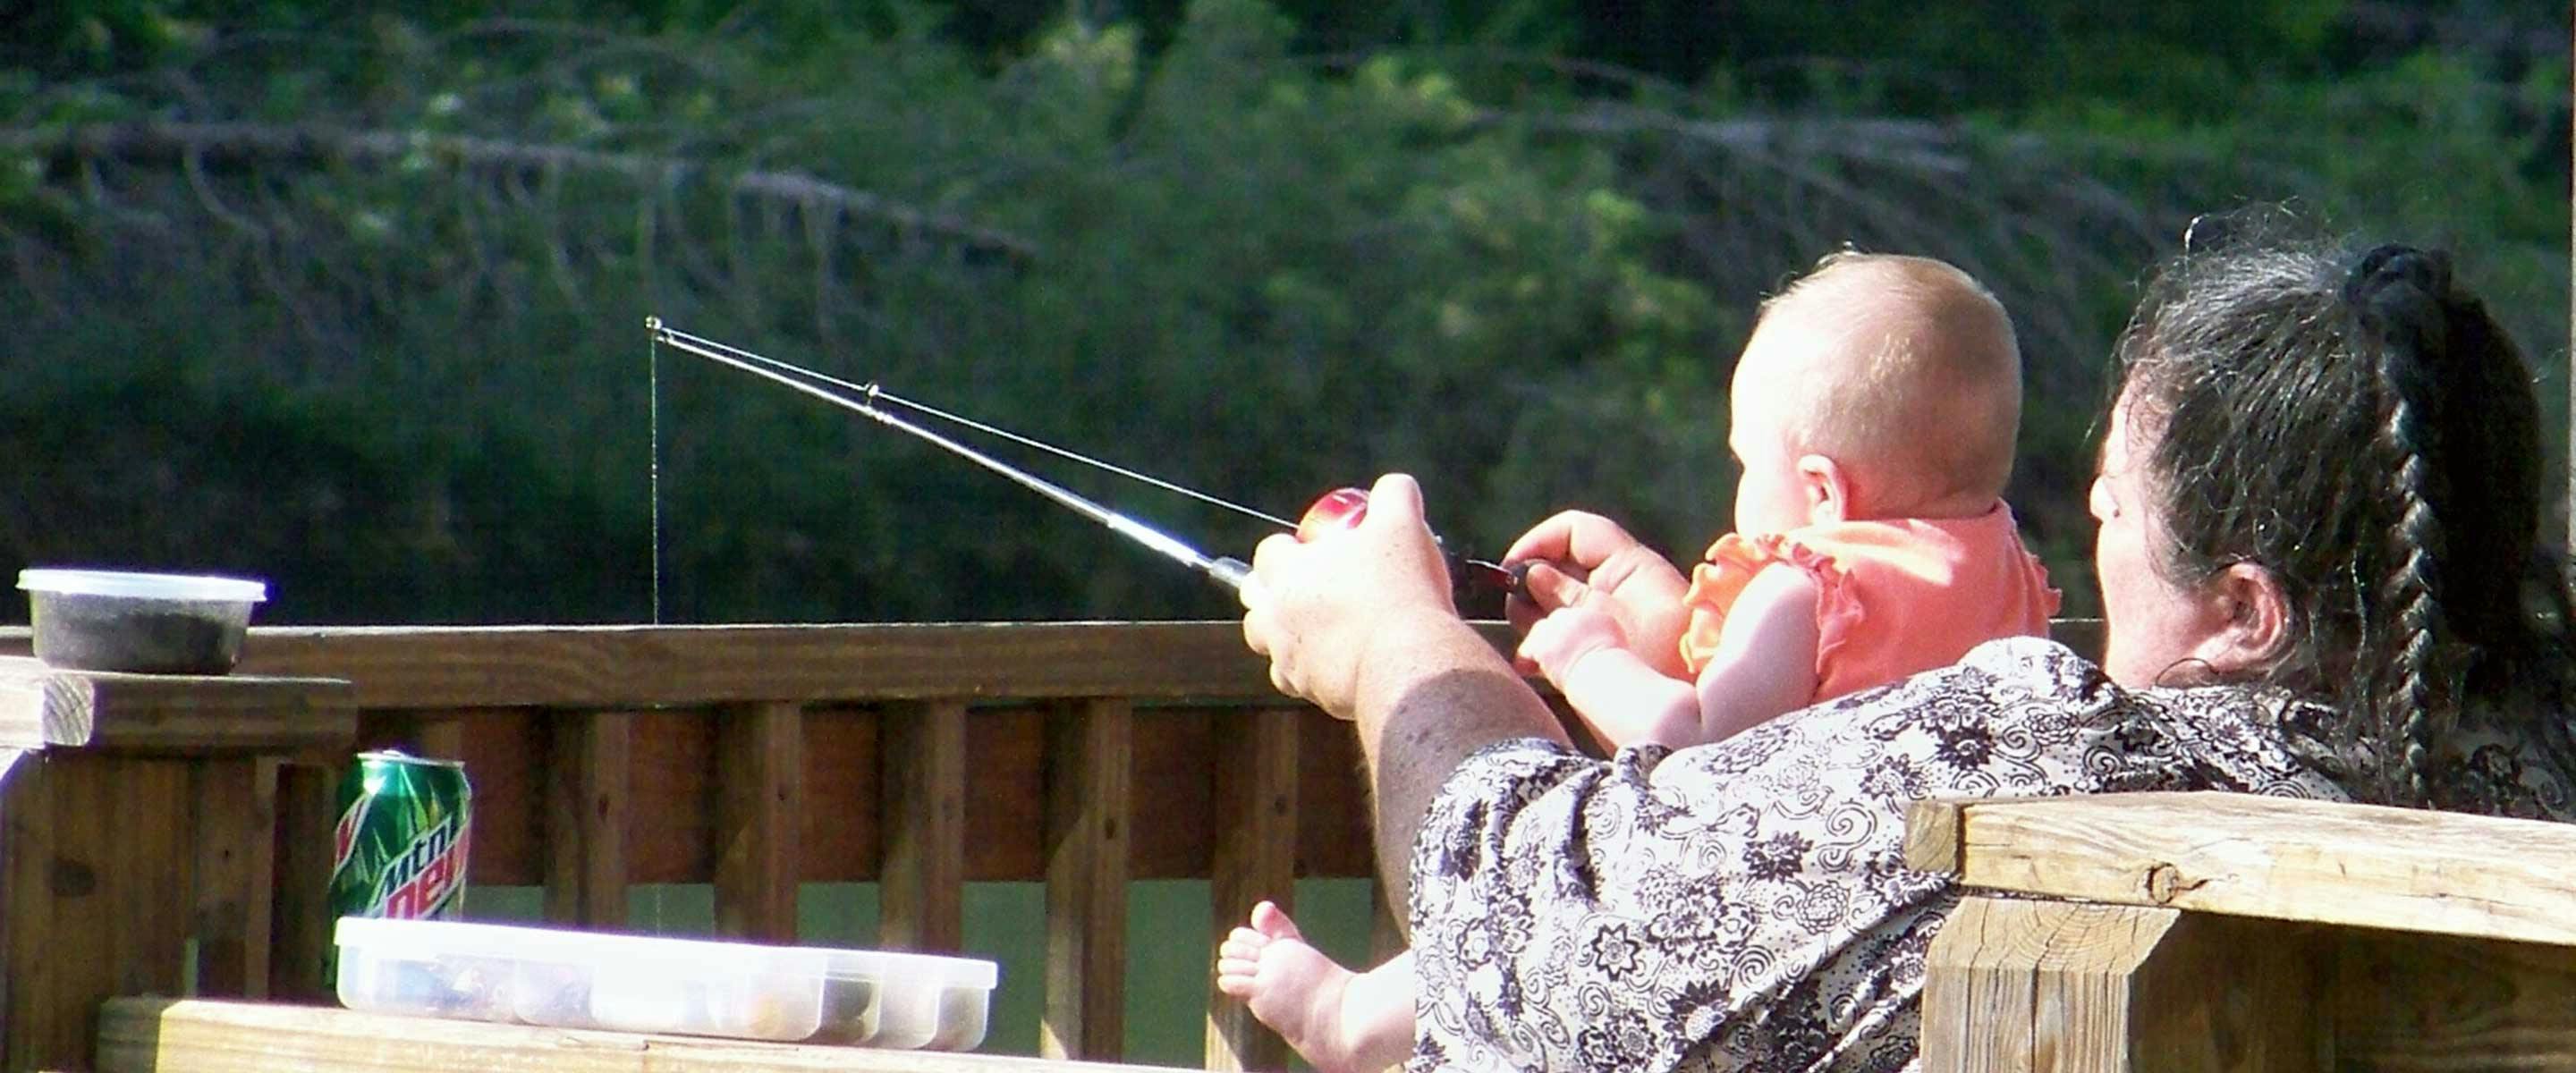 man fishing with baby in his lap